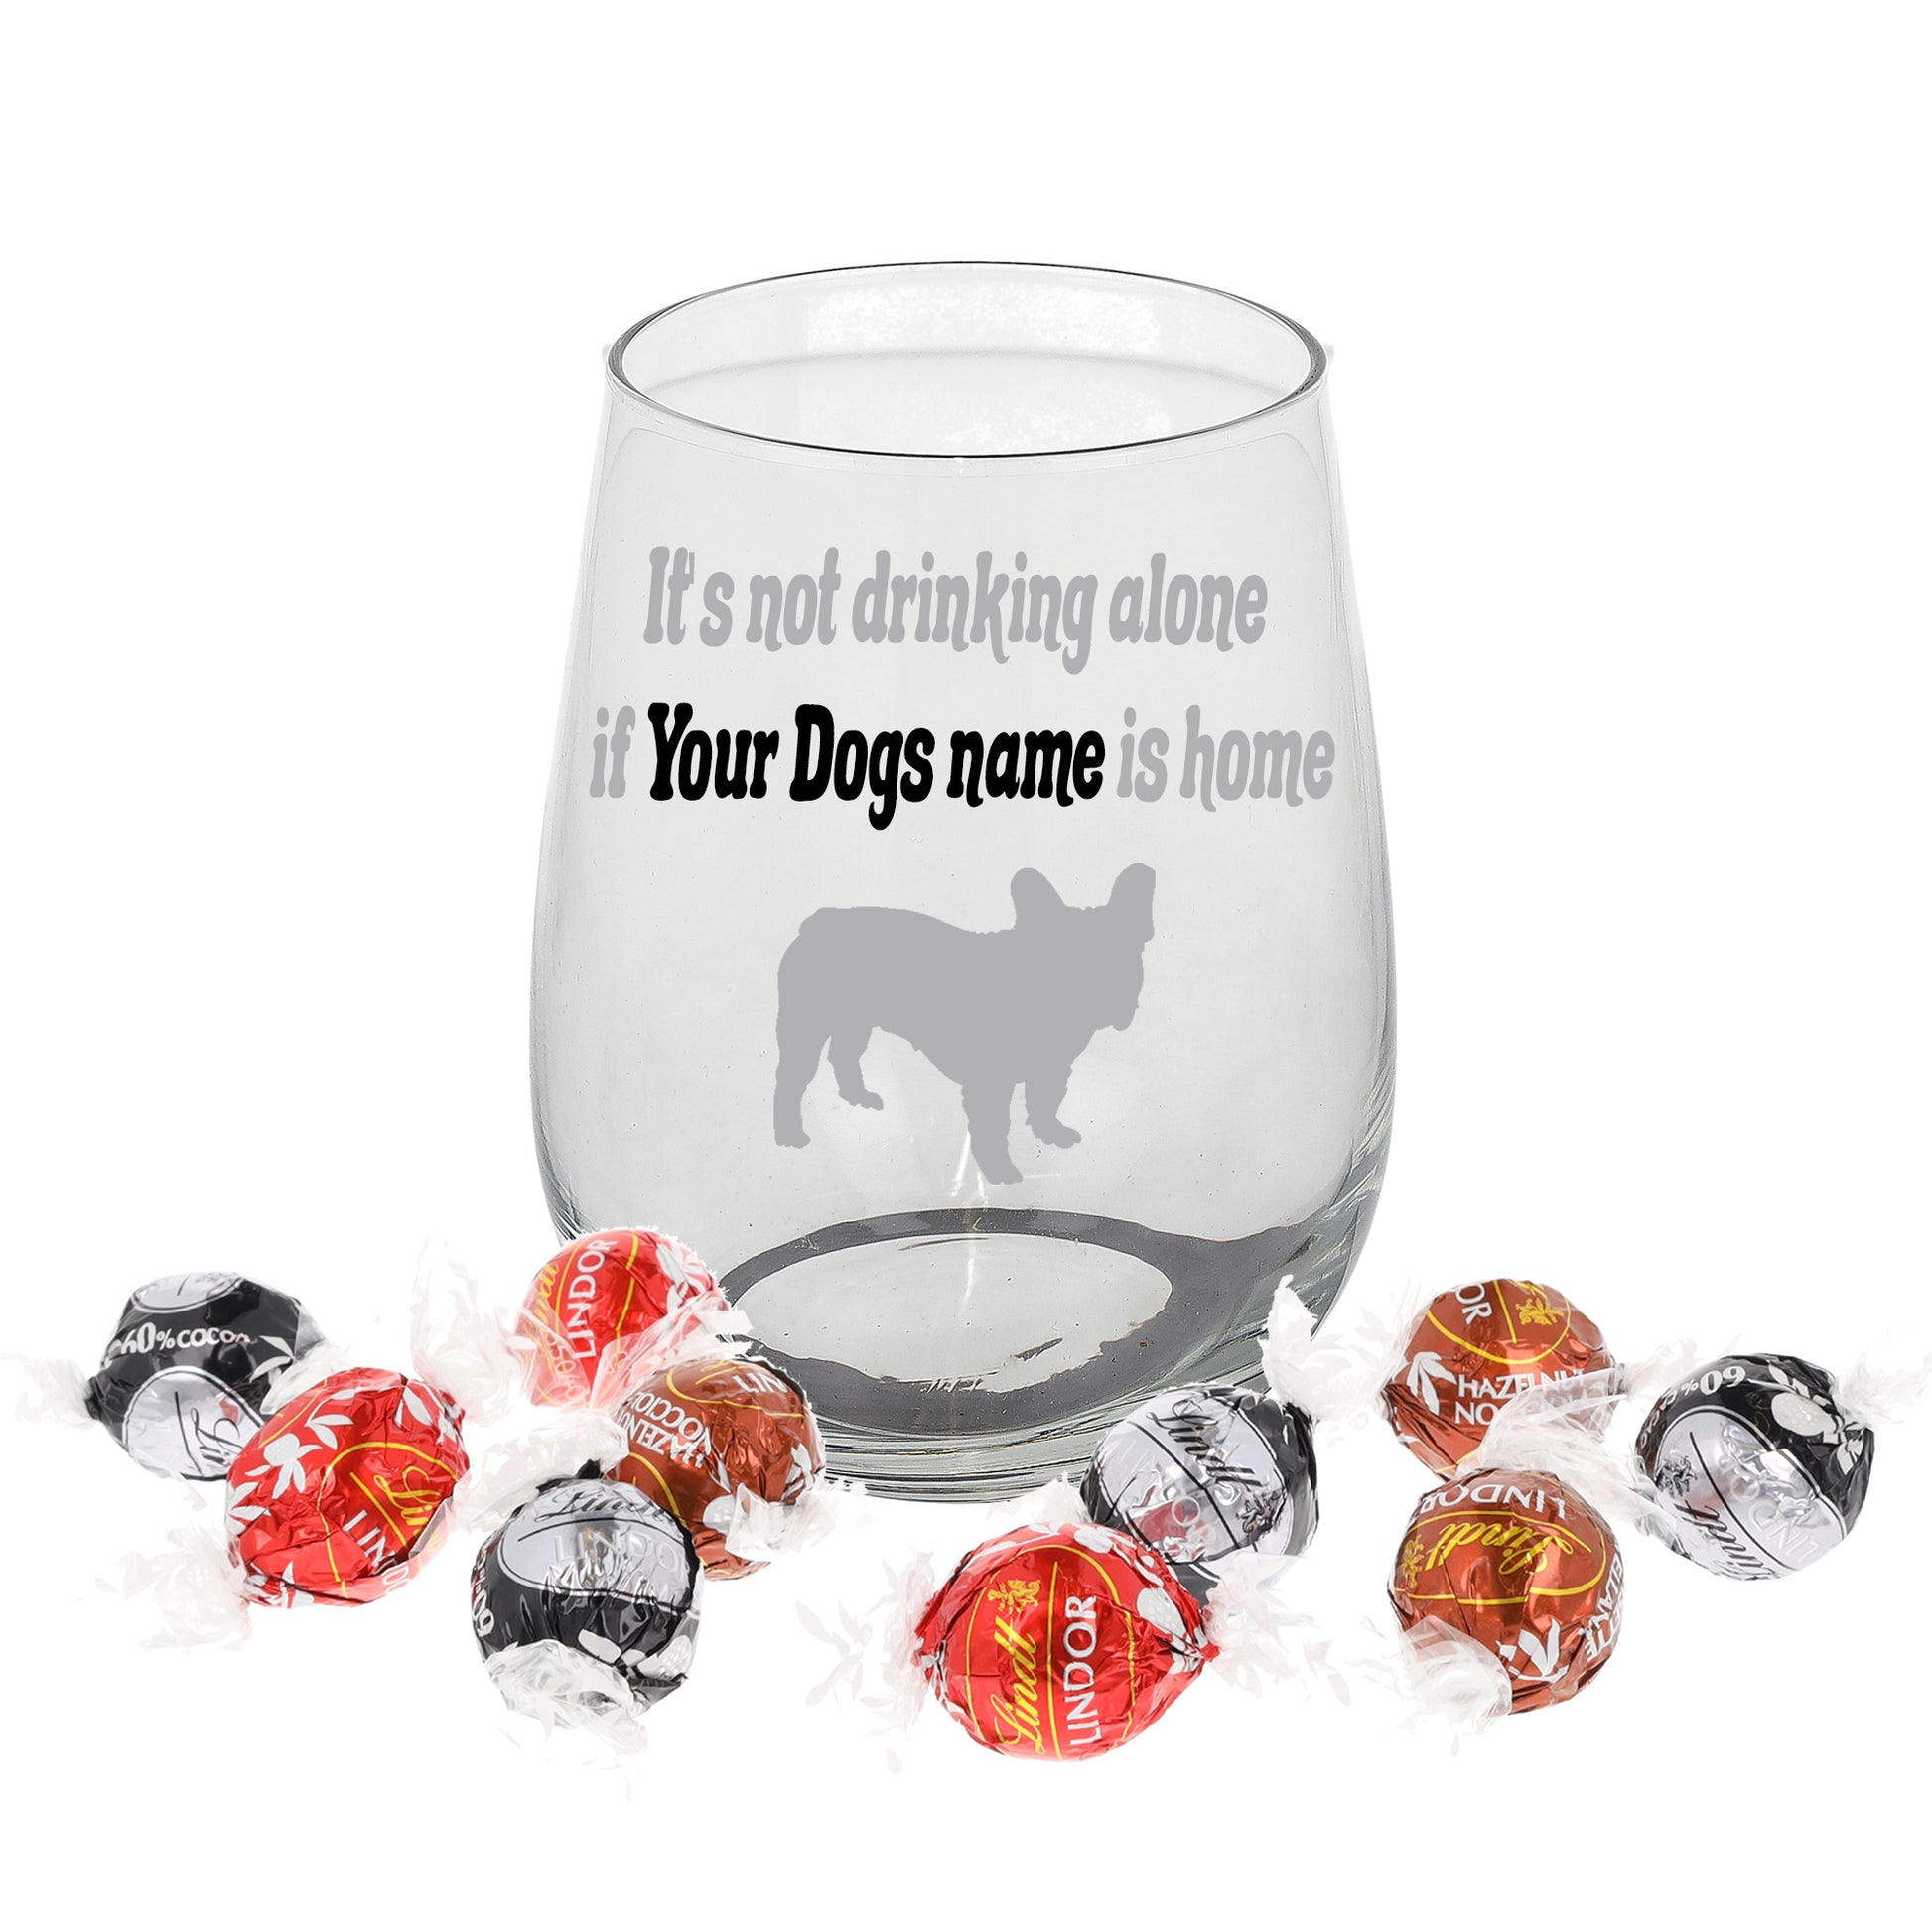 Engraved Personalised Dog Breed Filled Stemless Wine Glass  - Always Looking Good - Filled with Lindt Chocolates  